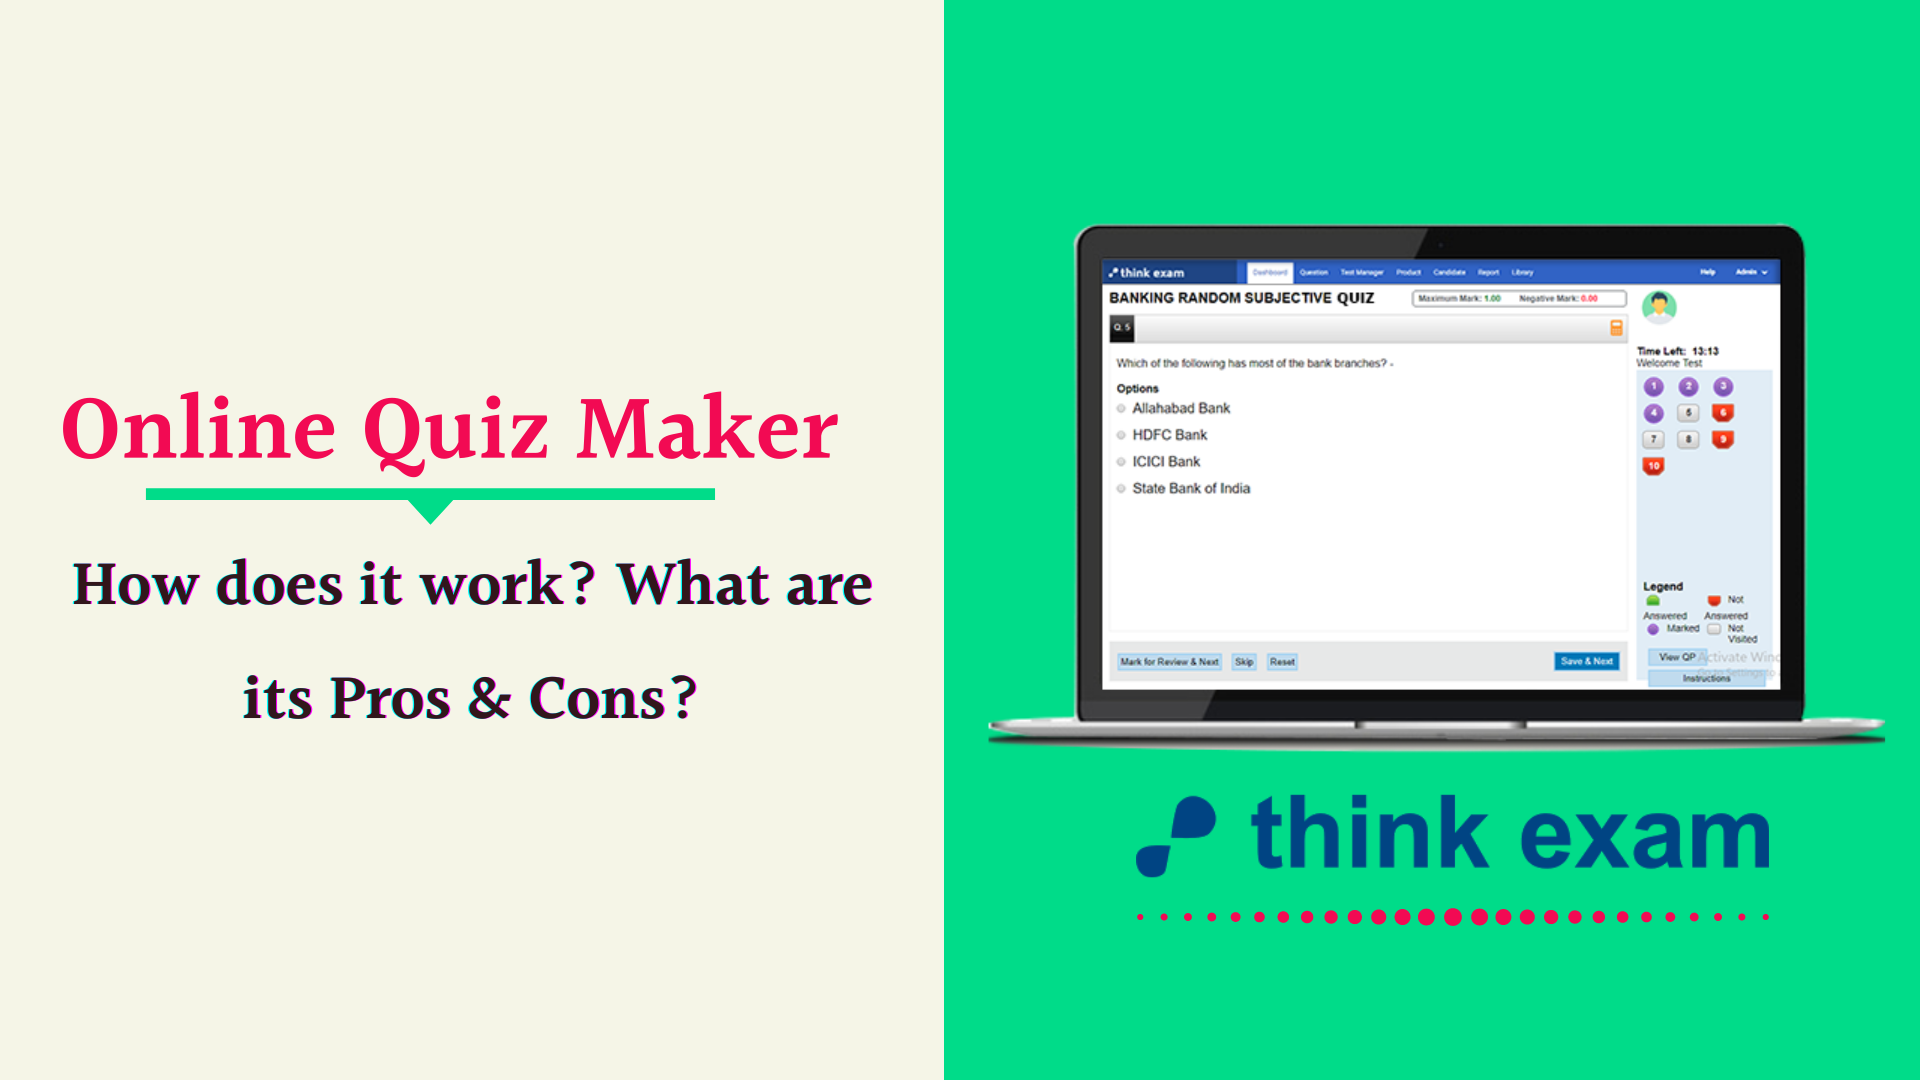 Online-Quiz-Maker-How-does-it-work-What-are-its-Pros-Cons.png